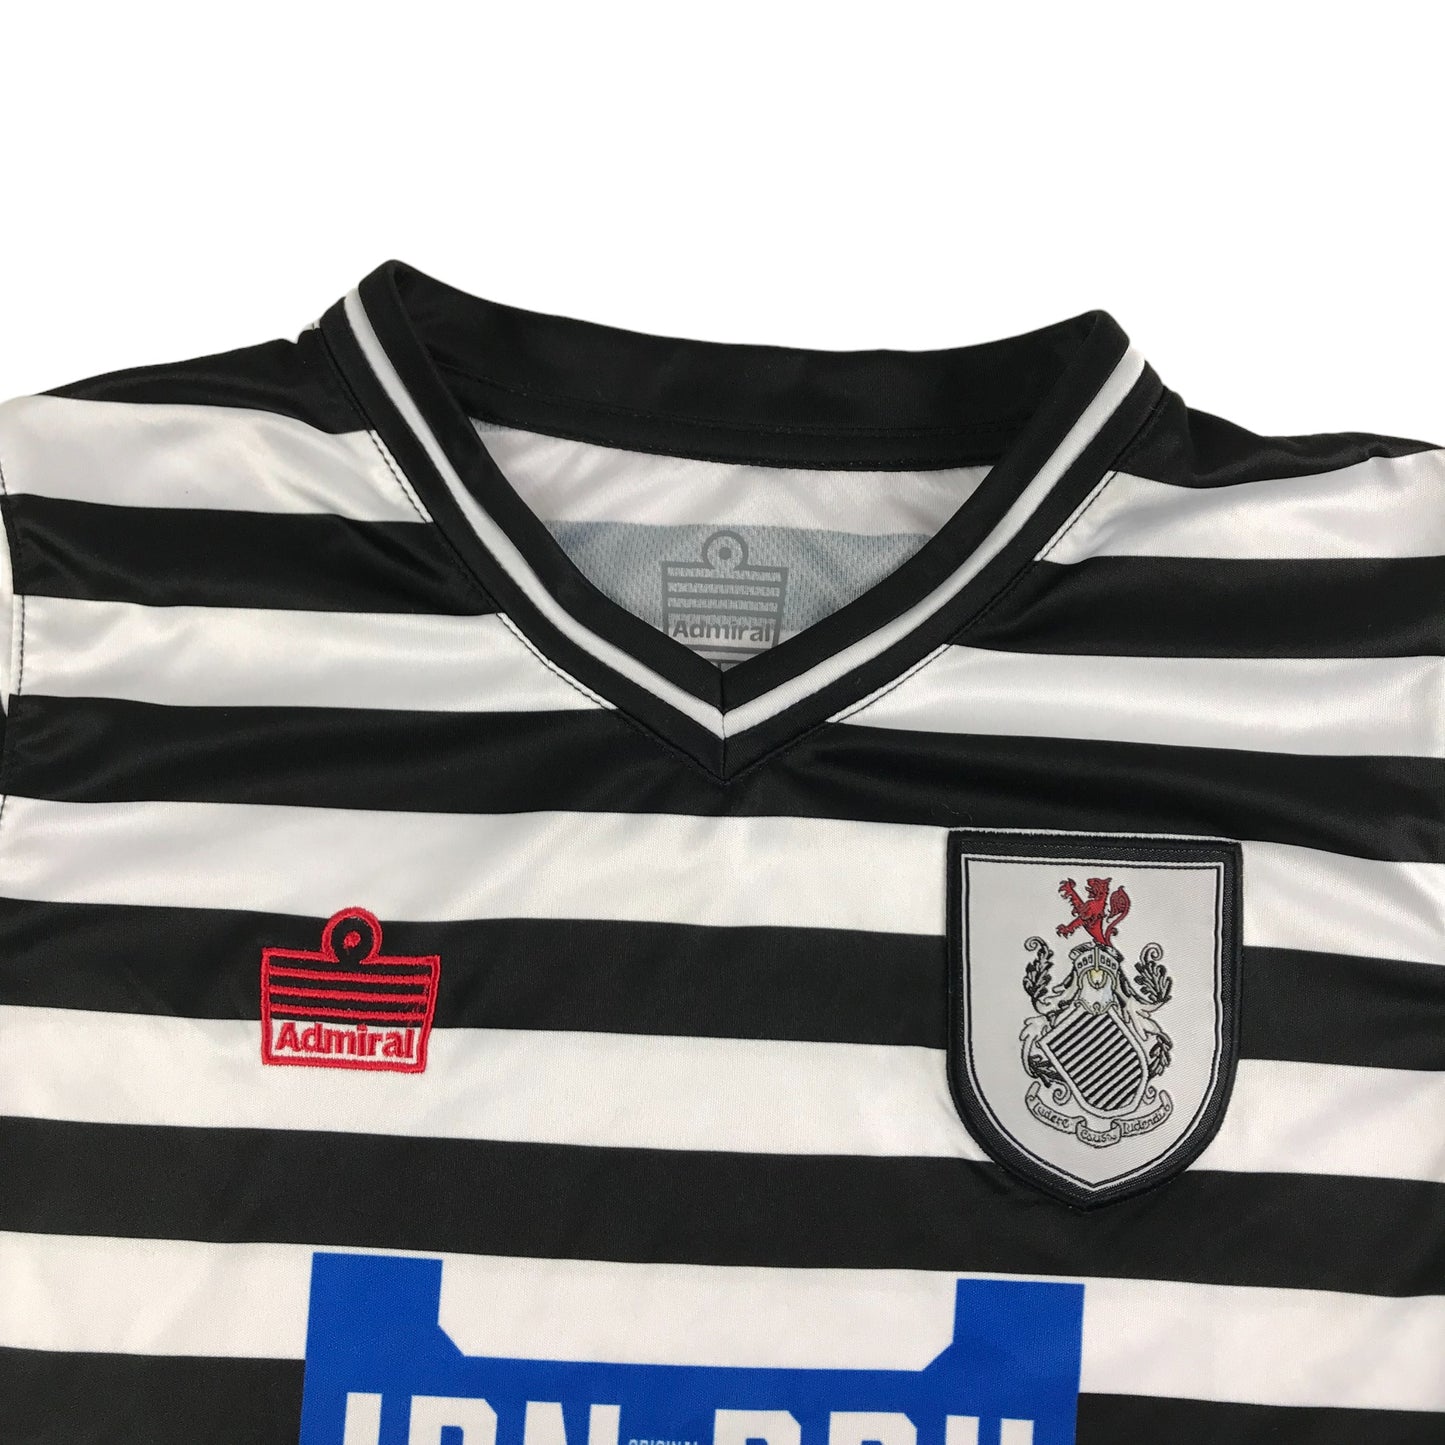 Admiral Queens Park FC 21/22 Home Football Top Age 10-12 Black And White Stripy